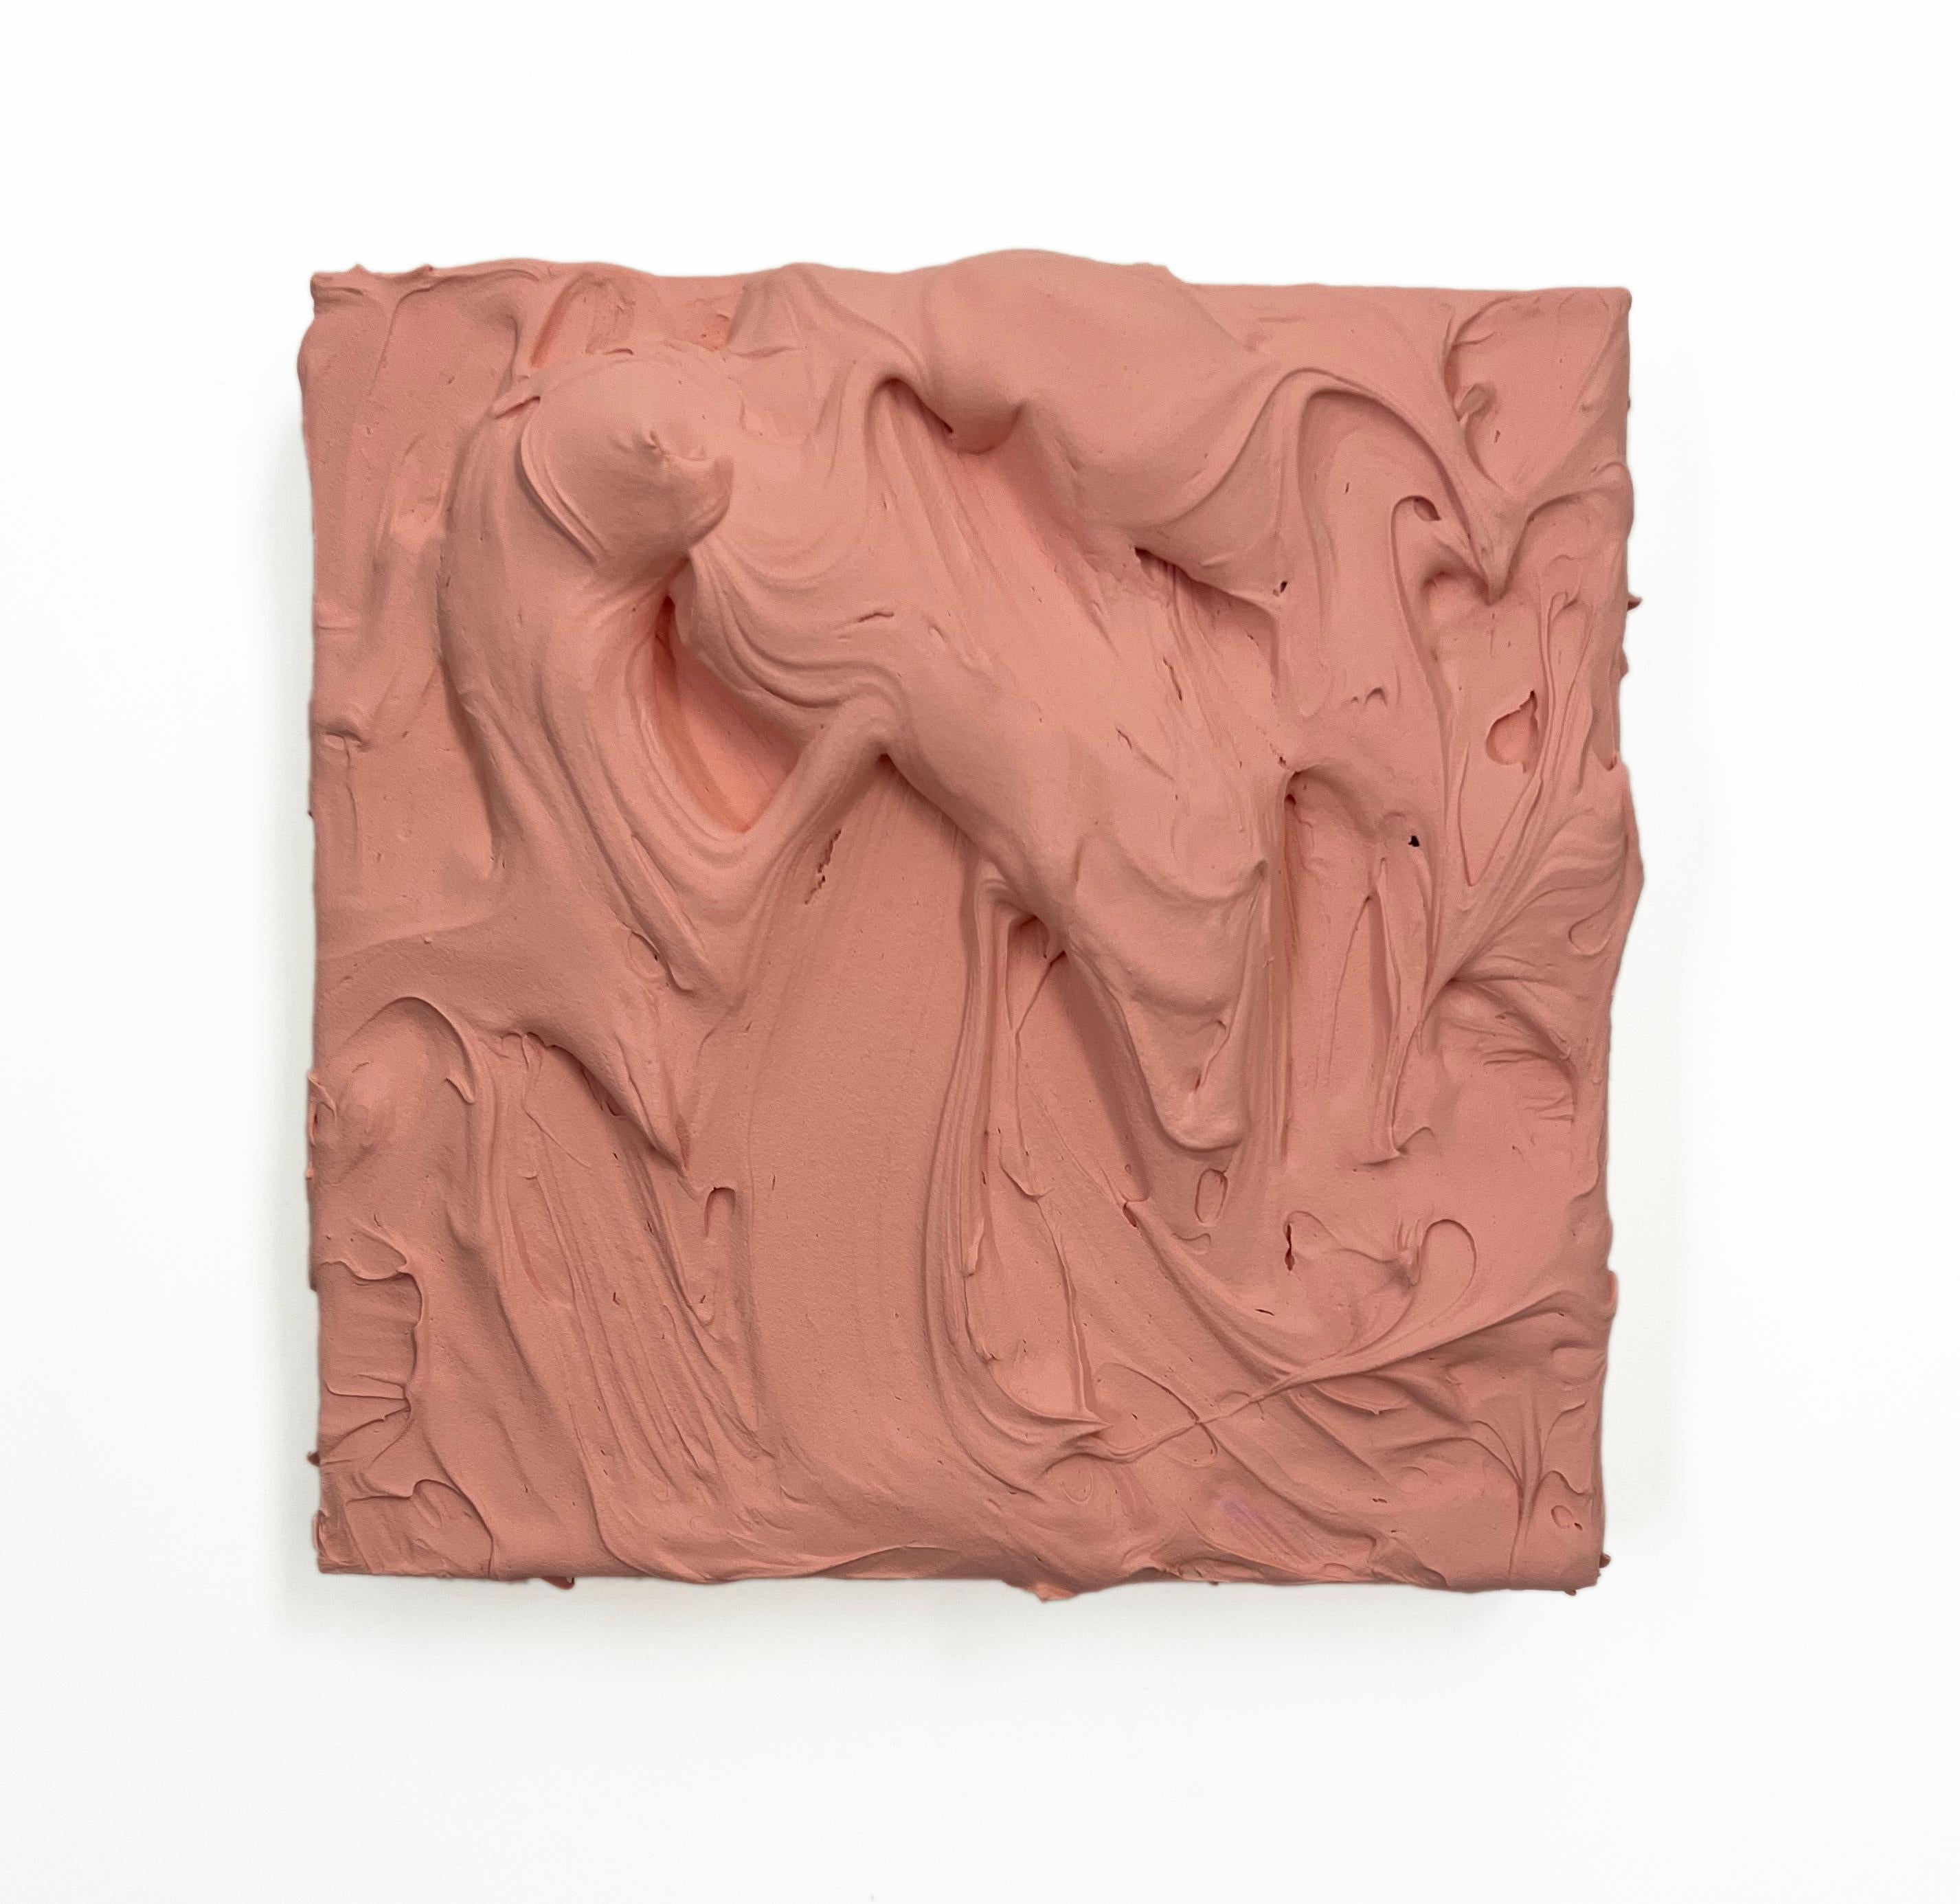 Chloe Hedden Abstract Sculpture - Flesh Excess (rose pink impasto thick painting monochrome pop art square design)